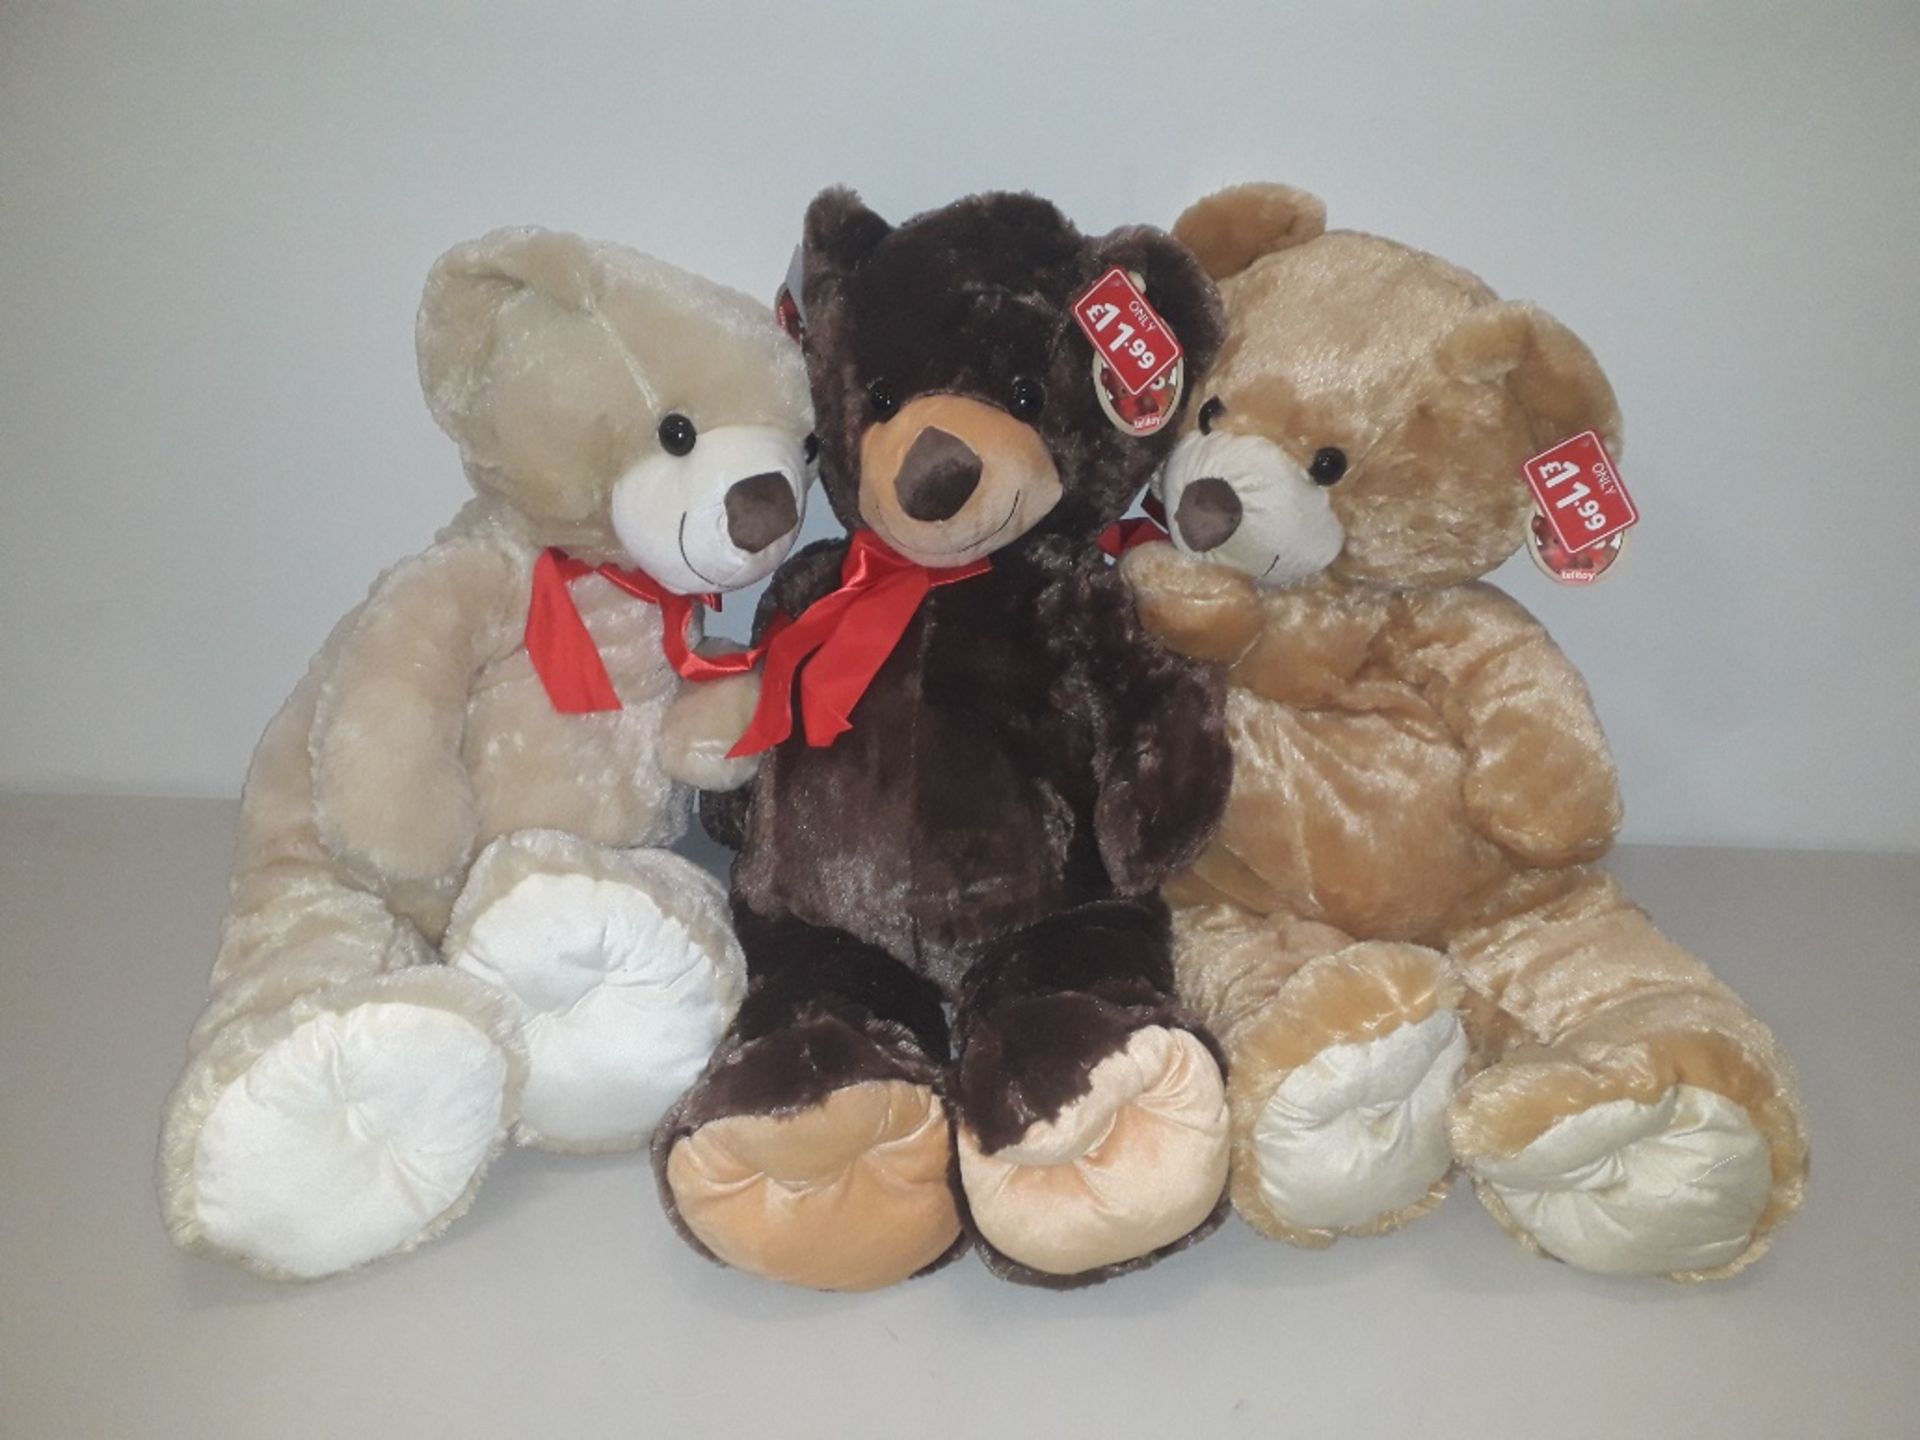 16 X BRAND NEW LARGE TELITOY BEAR HUGS TEDDIES IN 3 ASSORTED COLOURS IE TAN,BROWN AND CREAM - IN 2